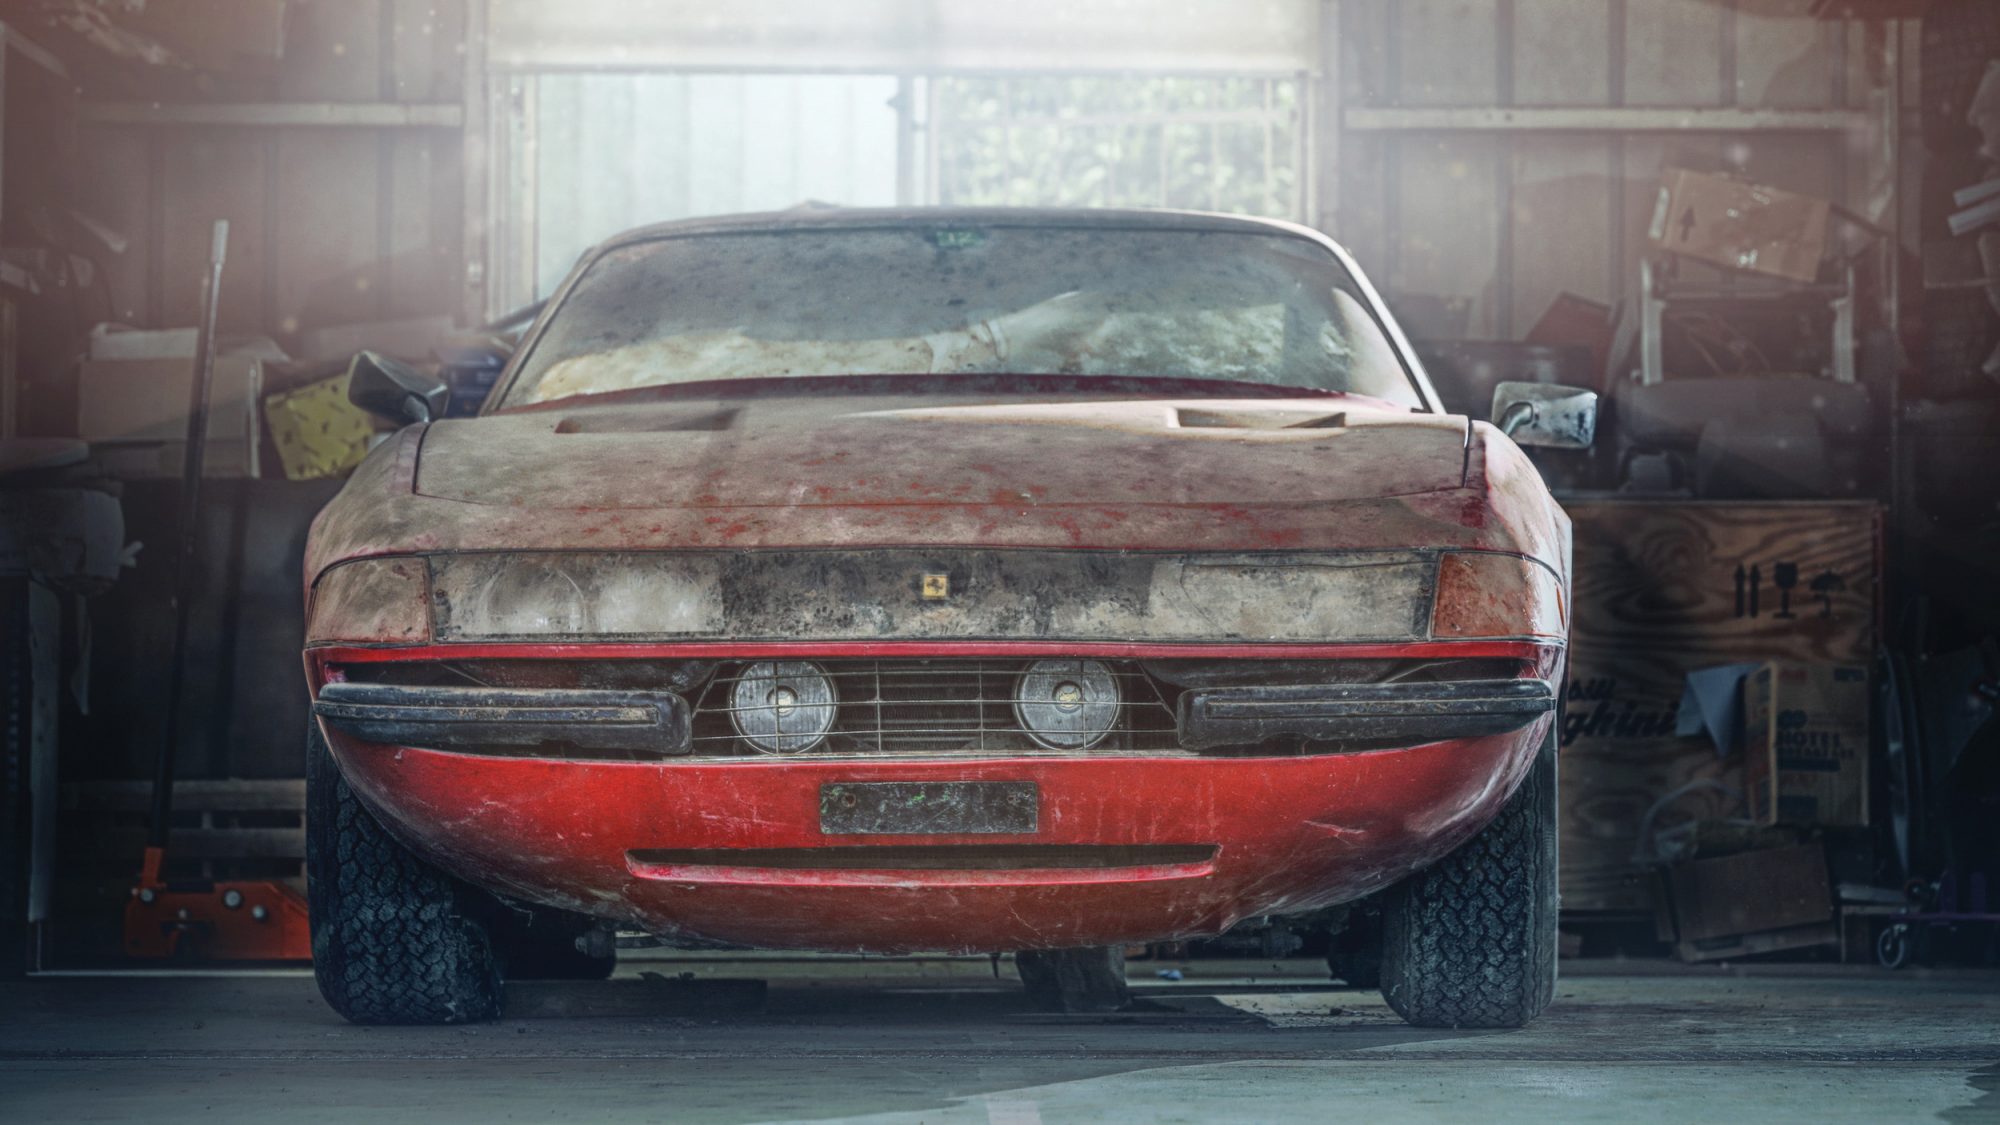 Where have all the shabby Ferraris gone?